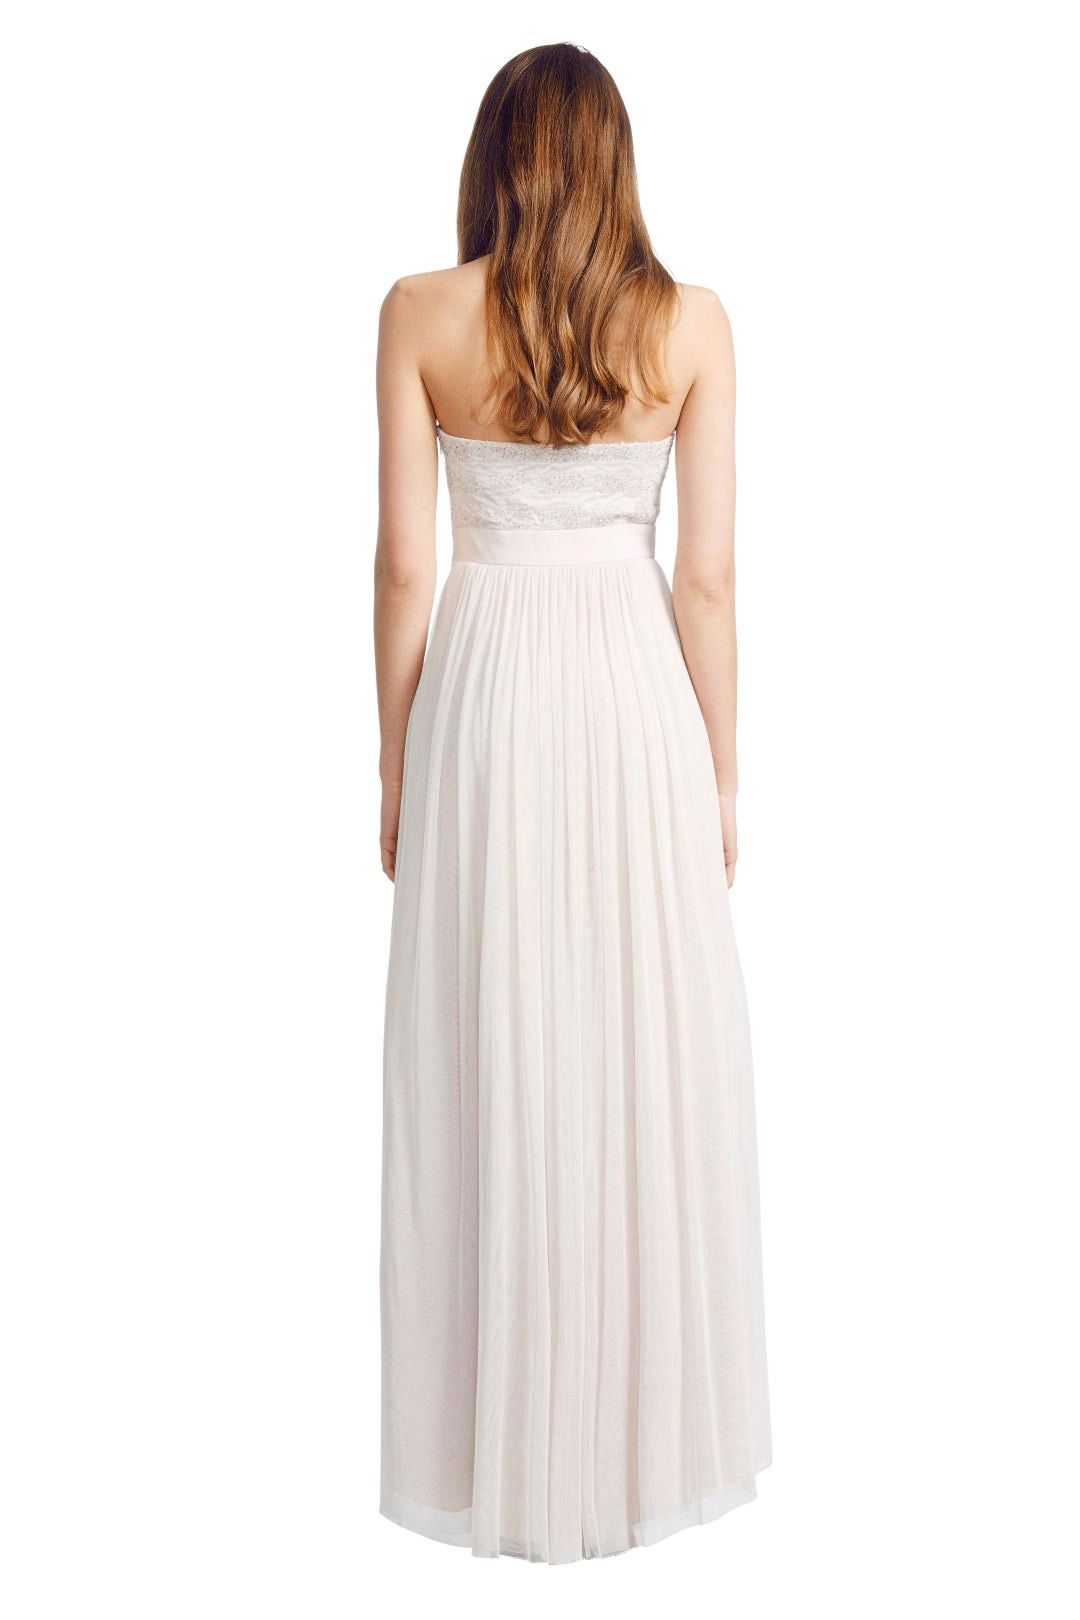 George - Pixel Gown - Shell - Back